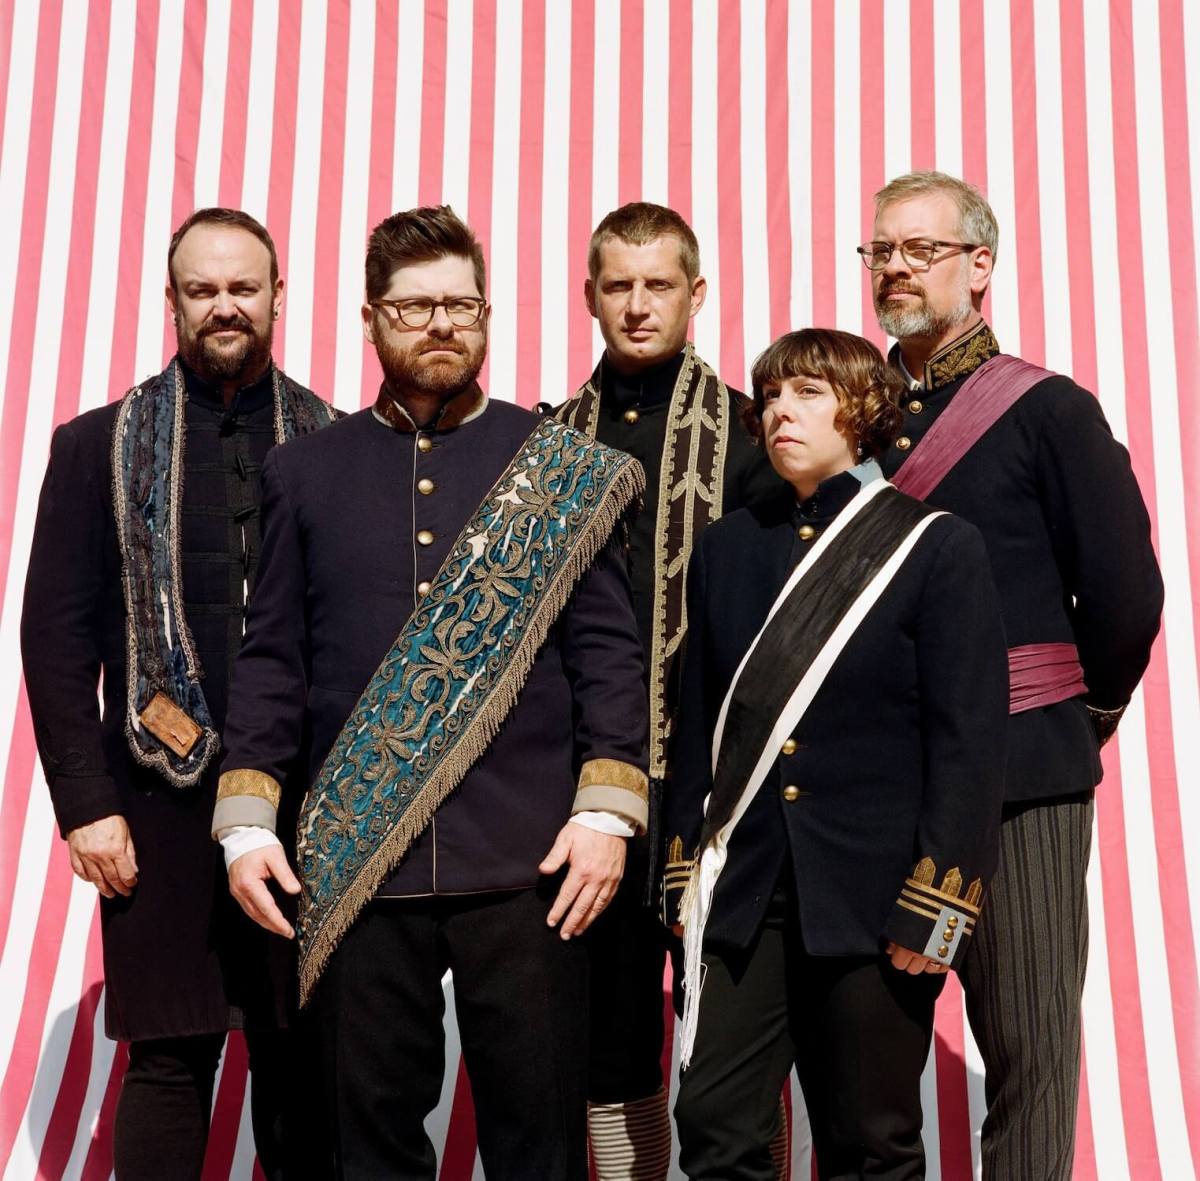 The Decemberists have a little more music to play for you